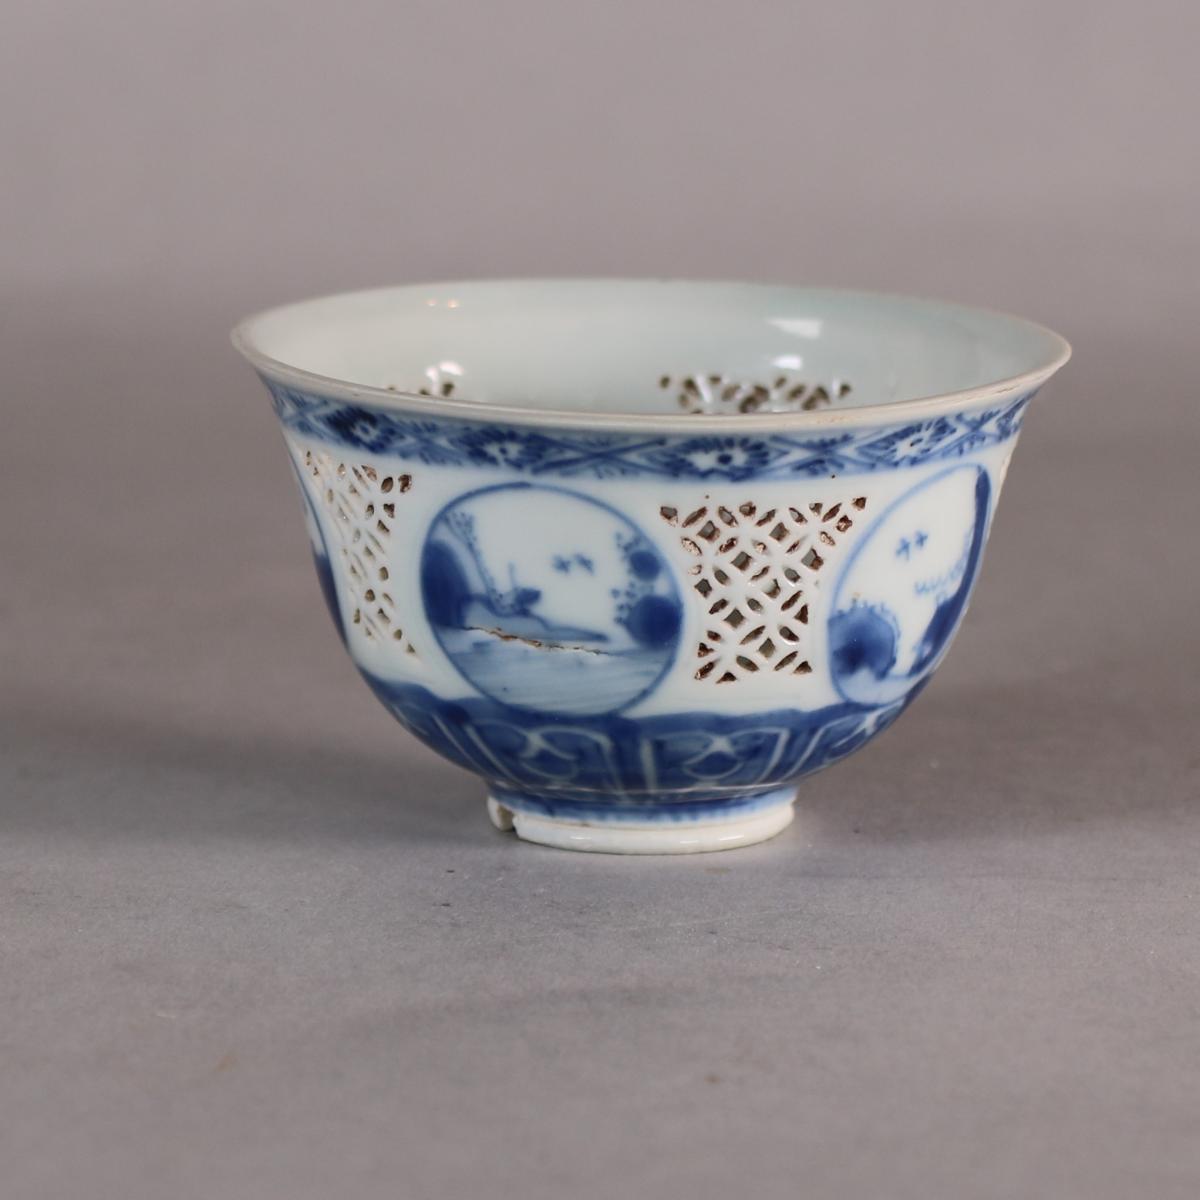 Small blue and white Hatcher cargo teabowl